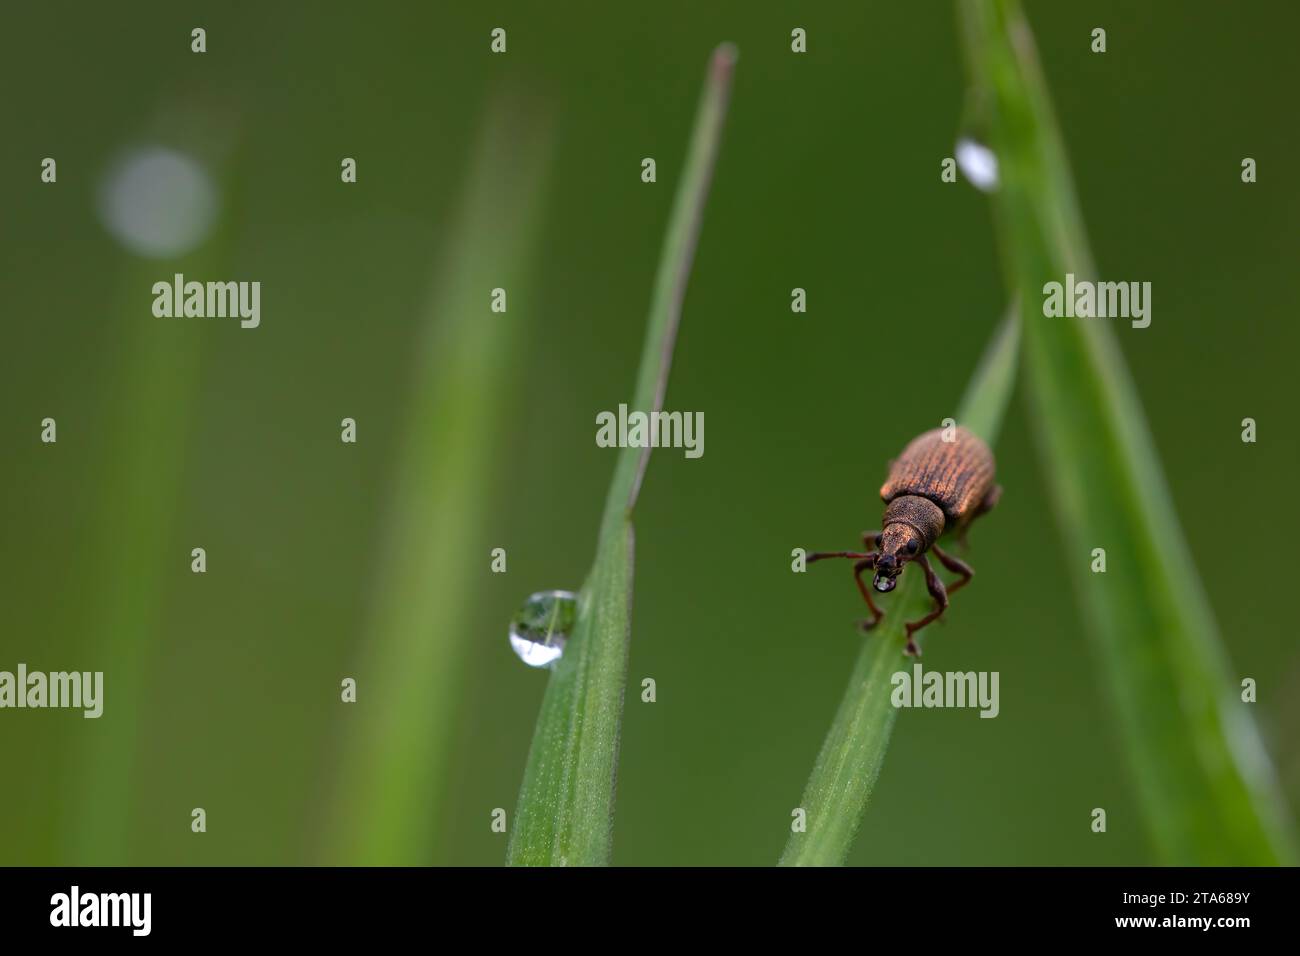 Bright reddish weevil perched on a grass. Macrophotography of horizontal fauna, on grass with dewdrops. Copy Space. Stock Photo